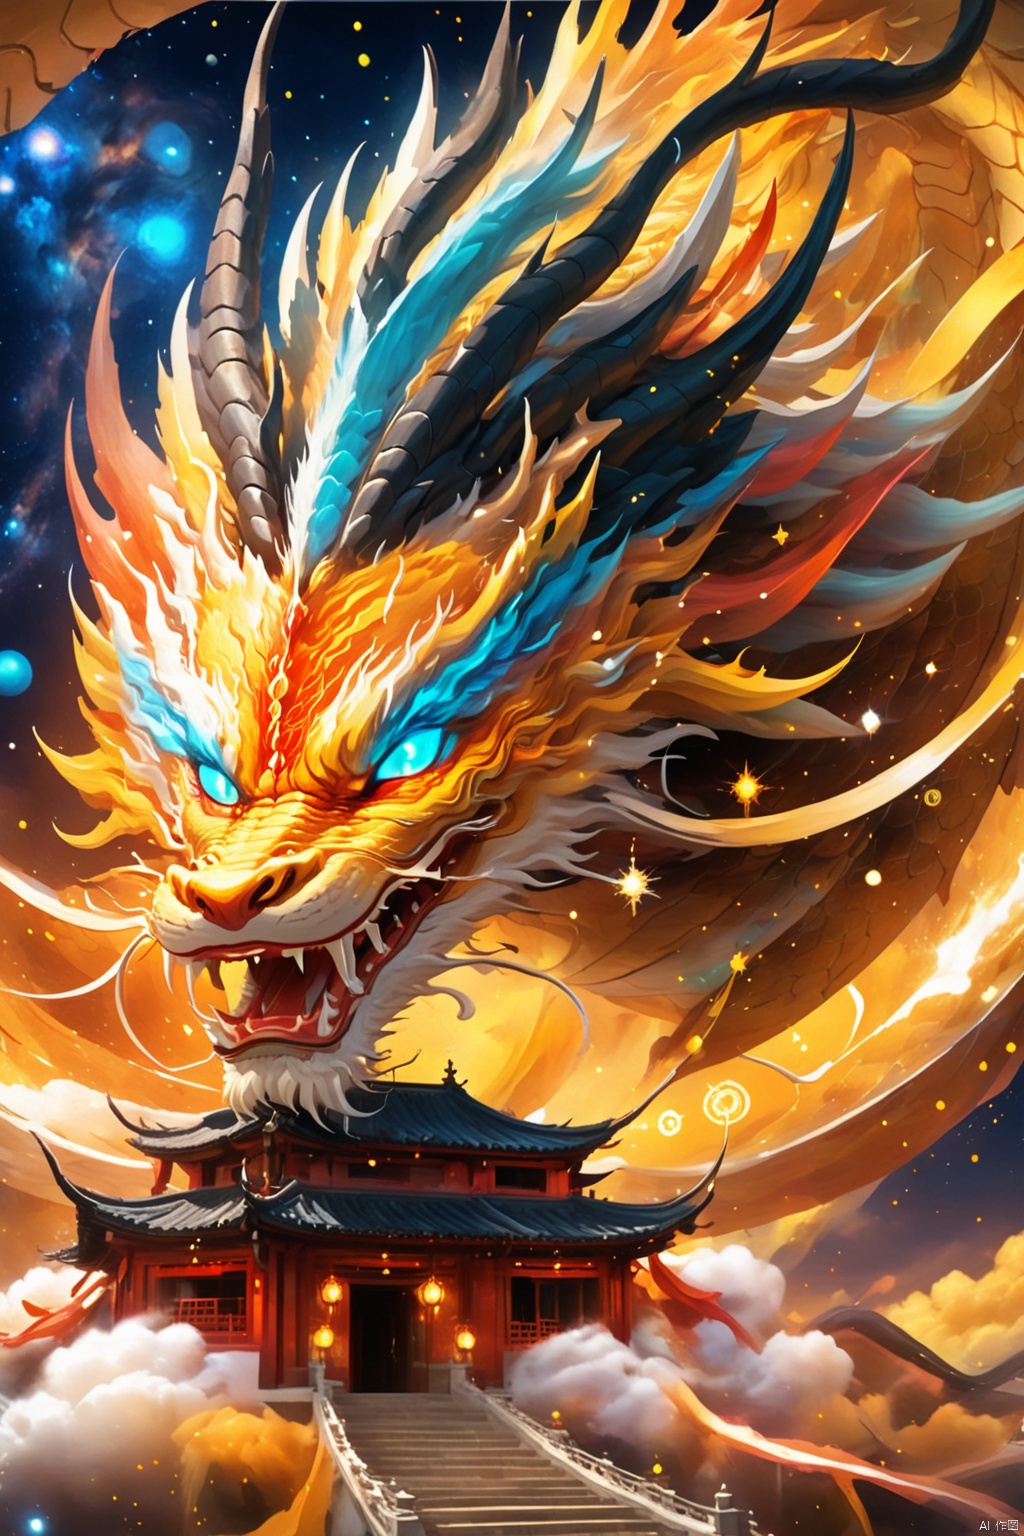 (Pi DAO link:1.58) (Crypto Dragon King - Dragon with Five Claws: 1.48), (Dragon horn, dragon body, dragon tail), (mysterious halo: 1.36), (Star vortex, star river, star ring), travel in the universe, use digital crypto magic, guard the digital field, (cross-chain information: 1.24), (digital currency: 1.5), encryption algorithm, space-time light particles, (star vortex, star river, star ring), ultra HD, super detail, epic shock, visual art, surreal, mythological legend style, God beast, BJ_Sacred_beast